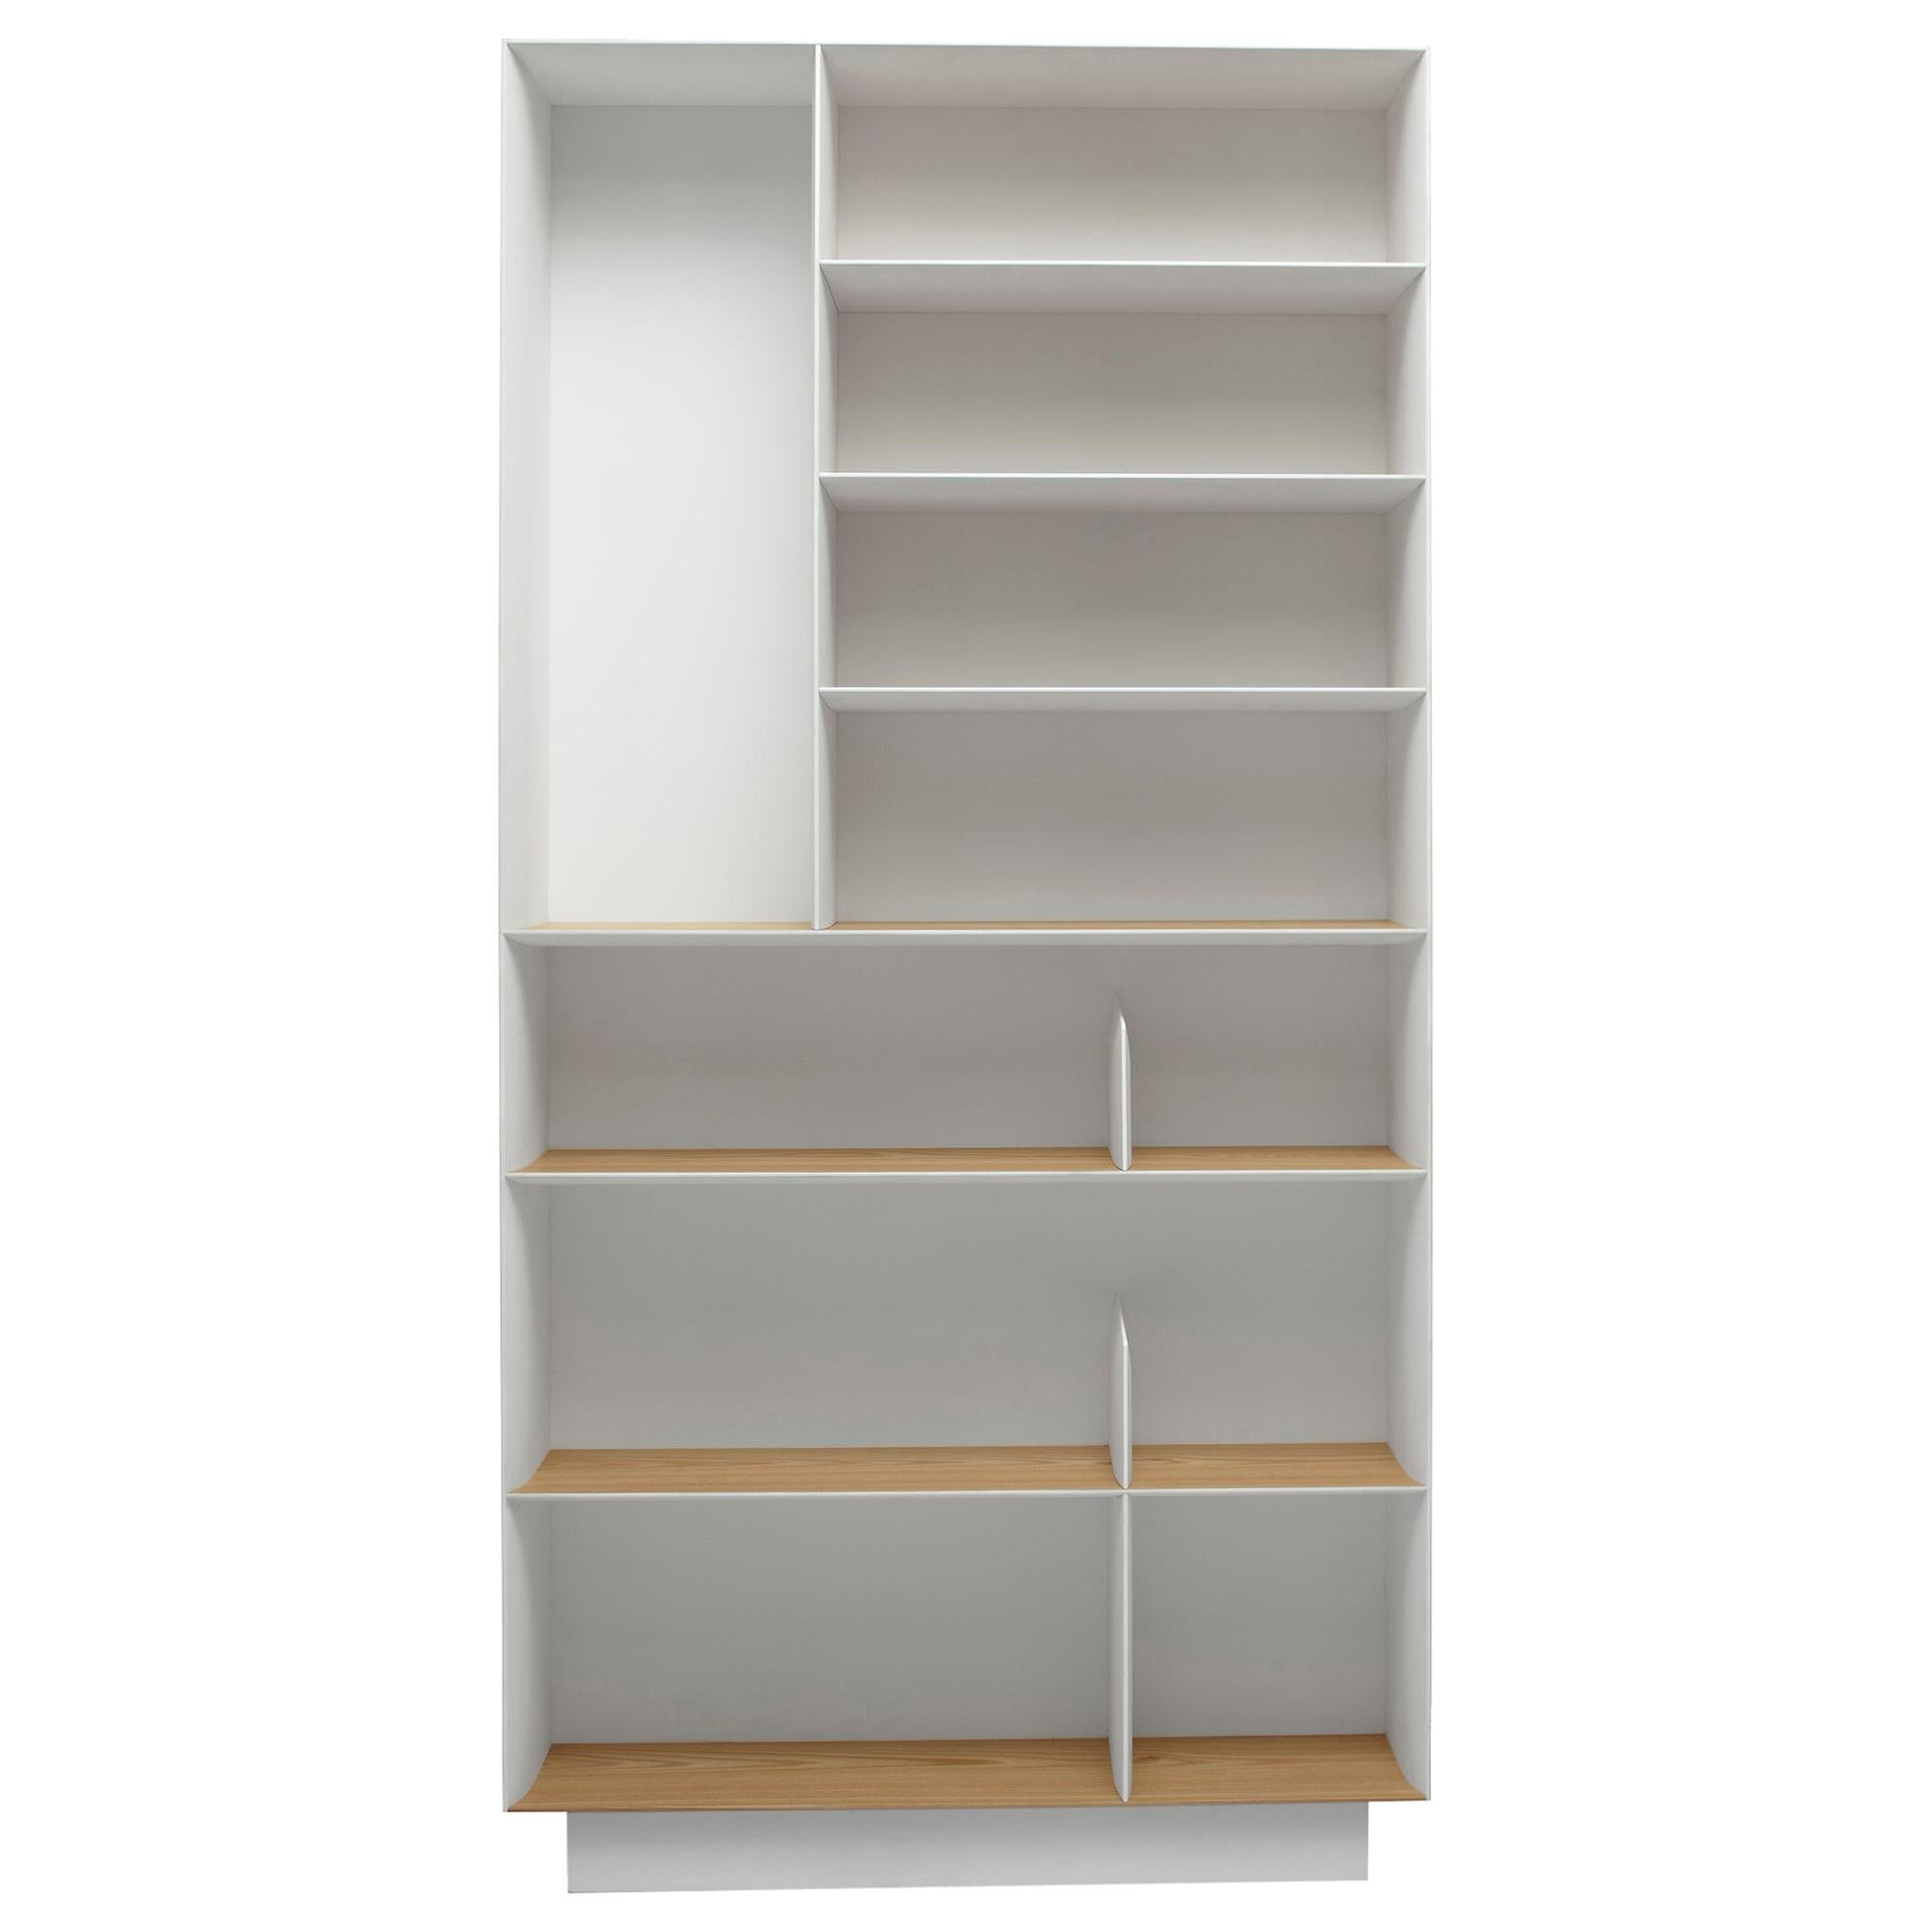 Hand Painted White Bookcase Molteni&C by Gio Ponti - D.357.1 - made in Italy